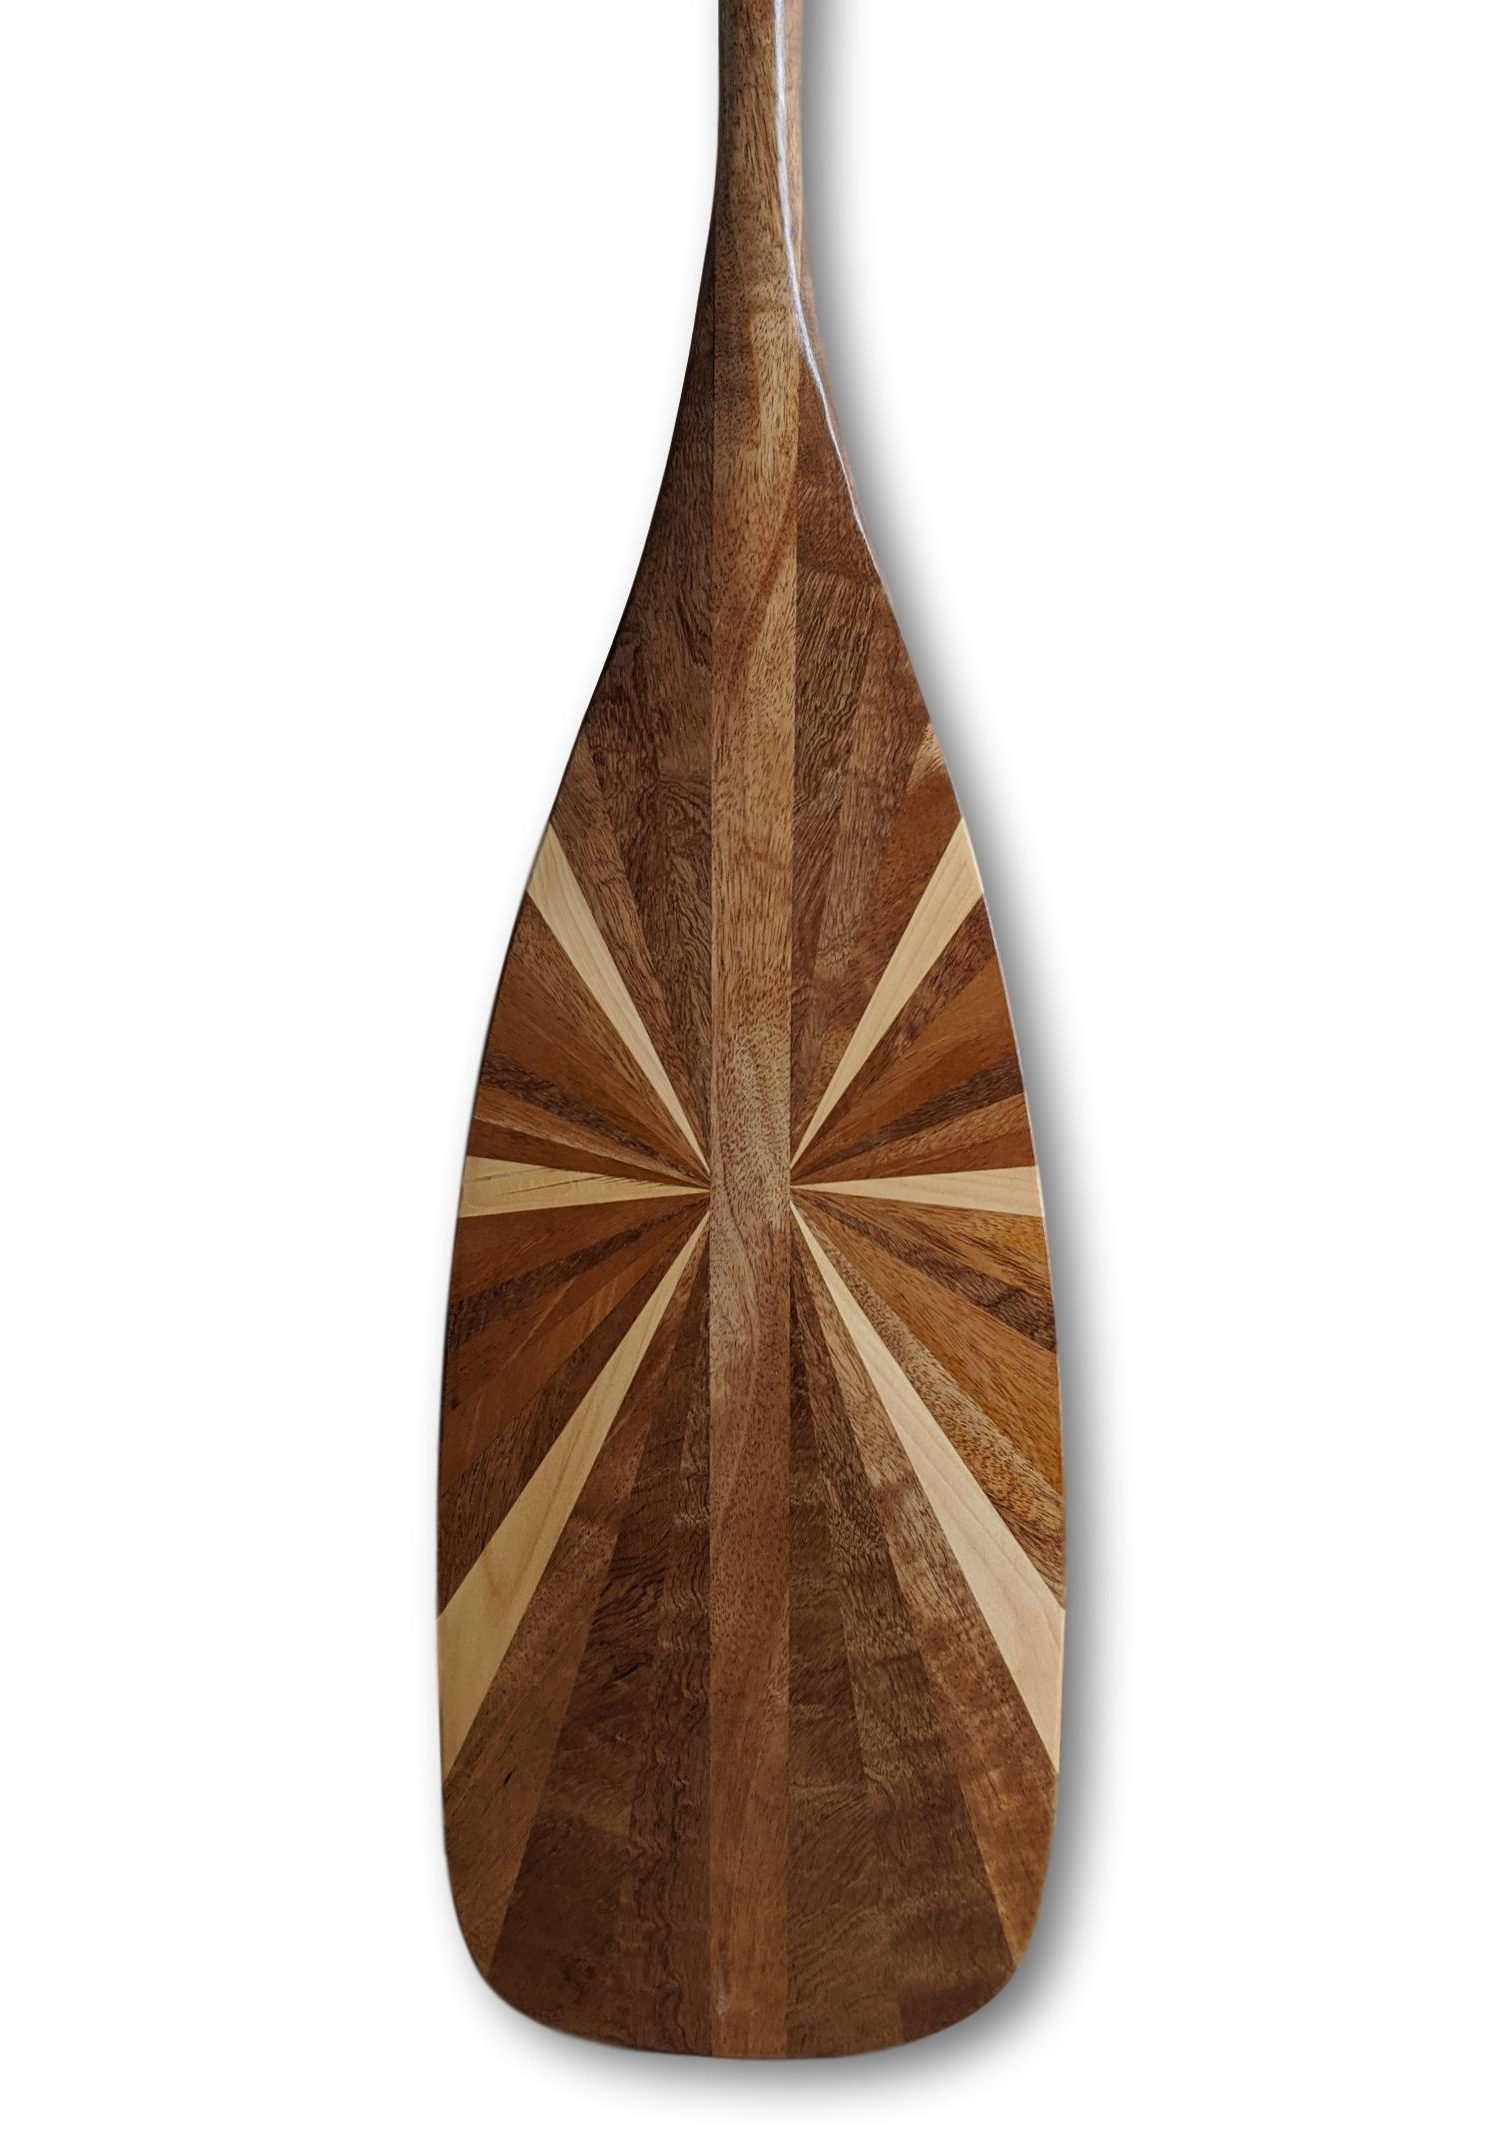 Kevin Kowaleski and Justin Mosling, Caledon, 2020, African Mahogany, Genuine Mahogany, Sapele, and Western Red Cedar, 58 inches, collection of the artists